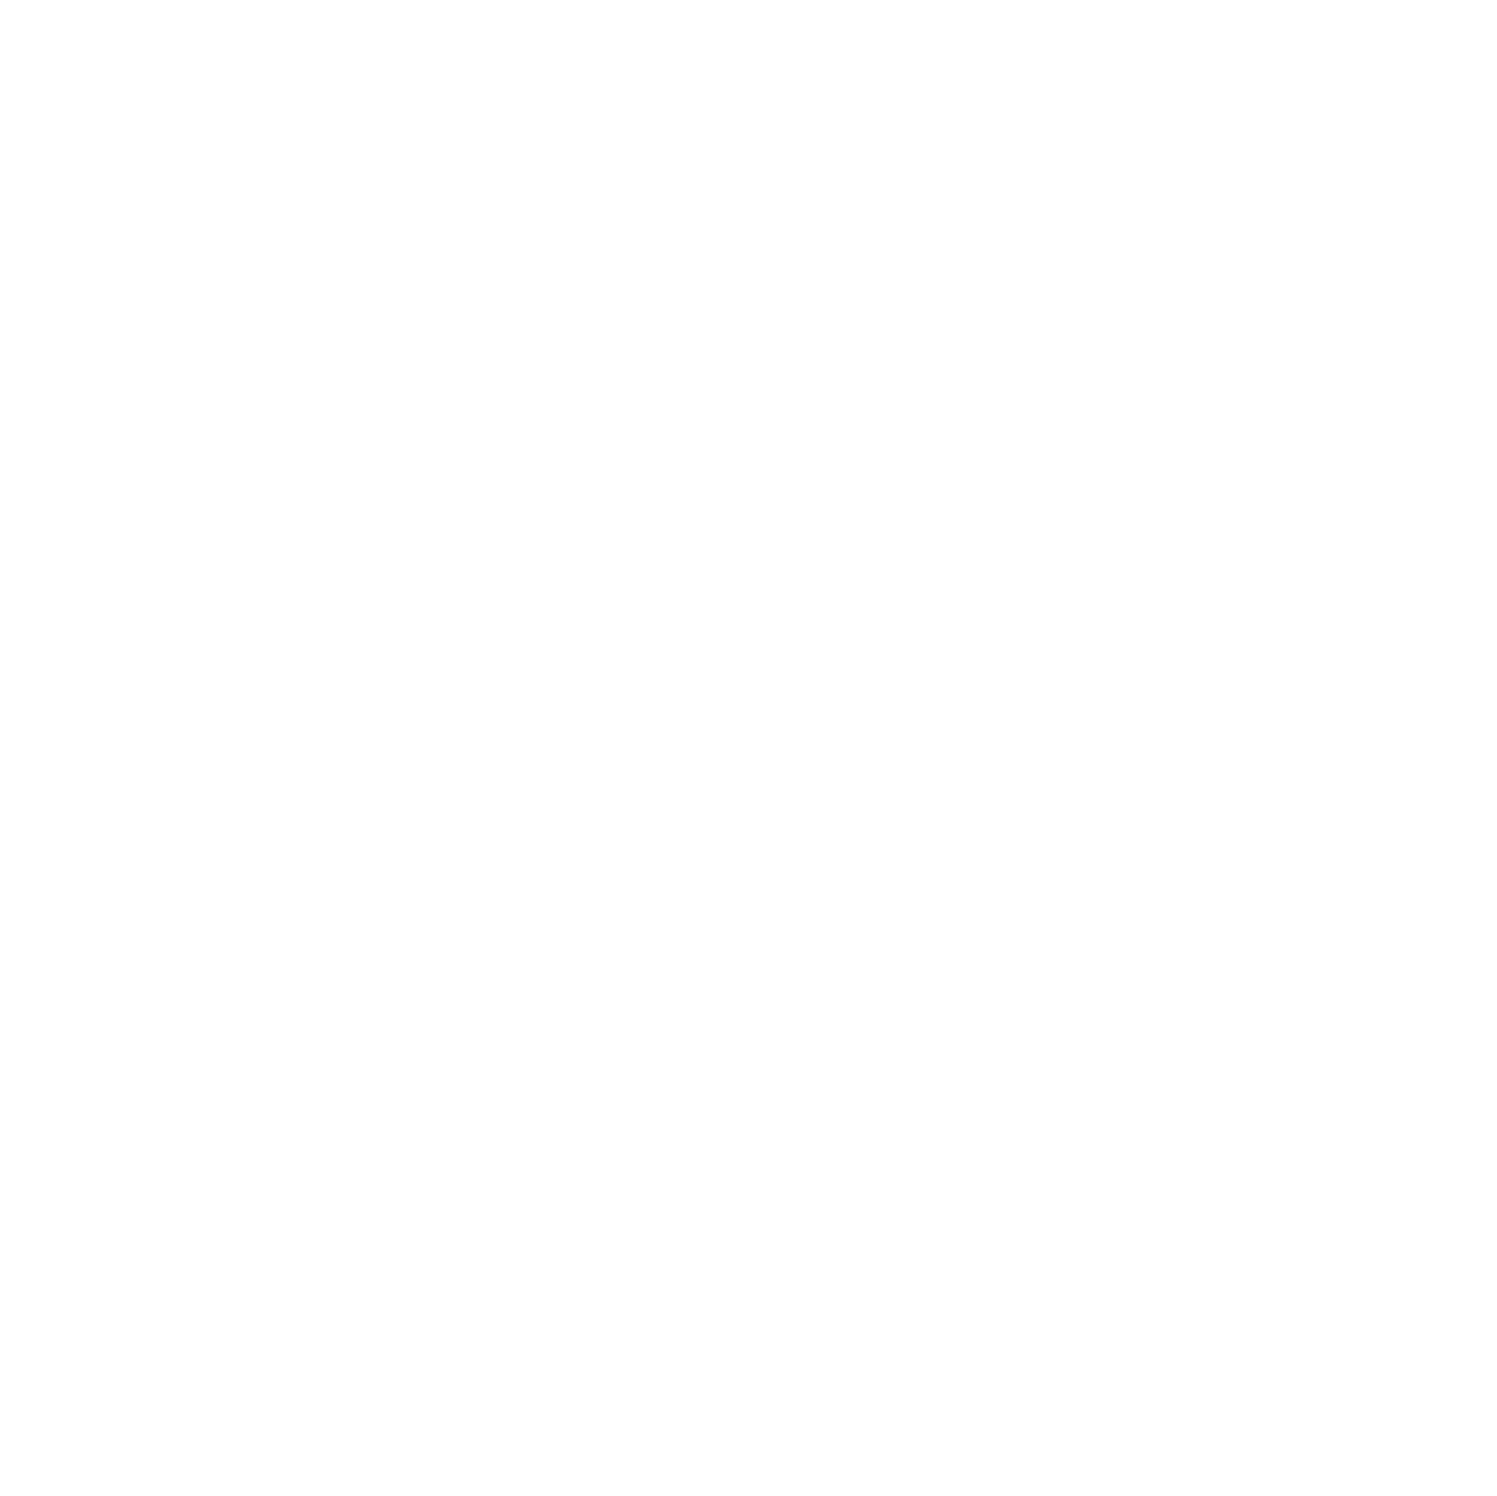 REX Roundtable Swag